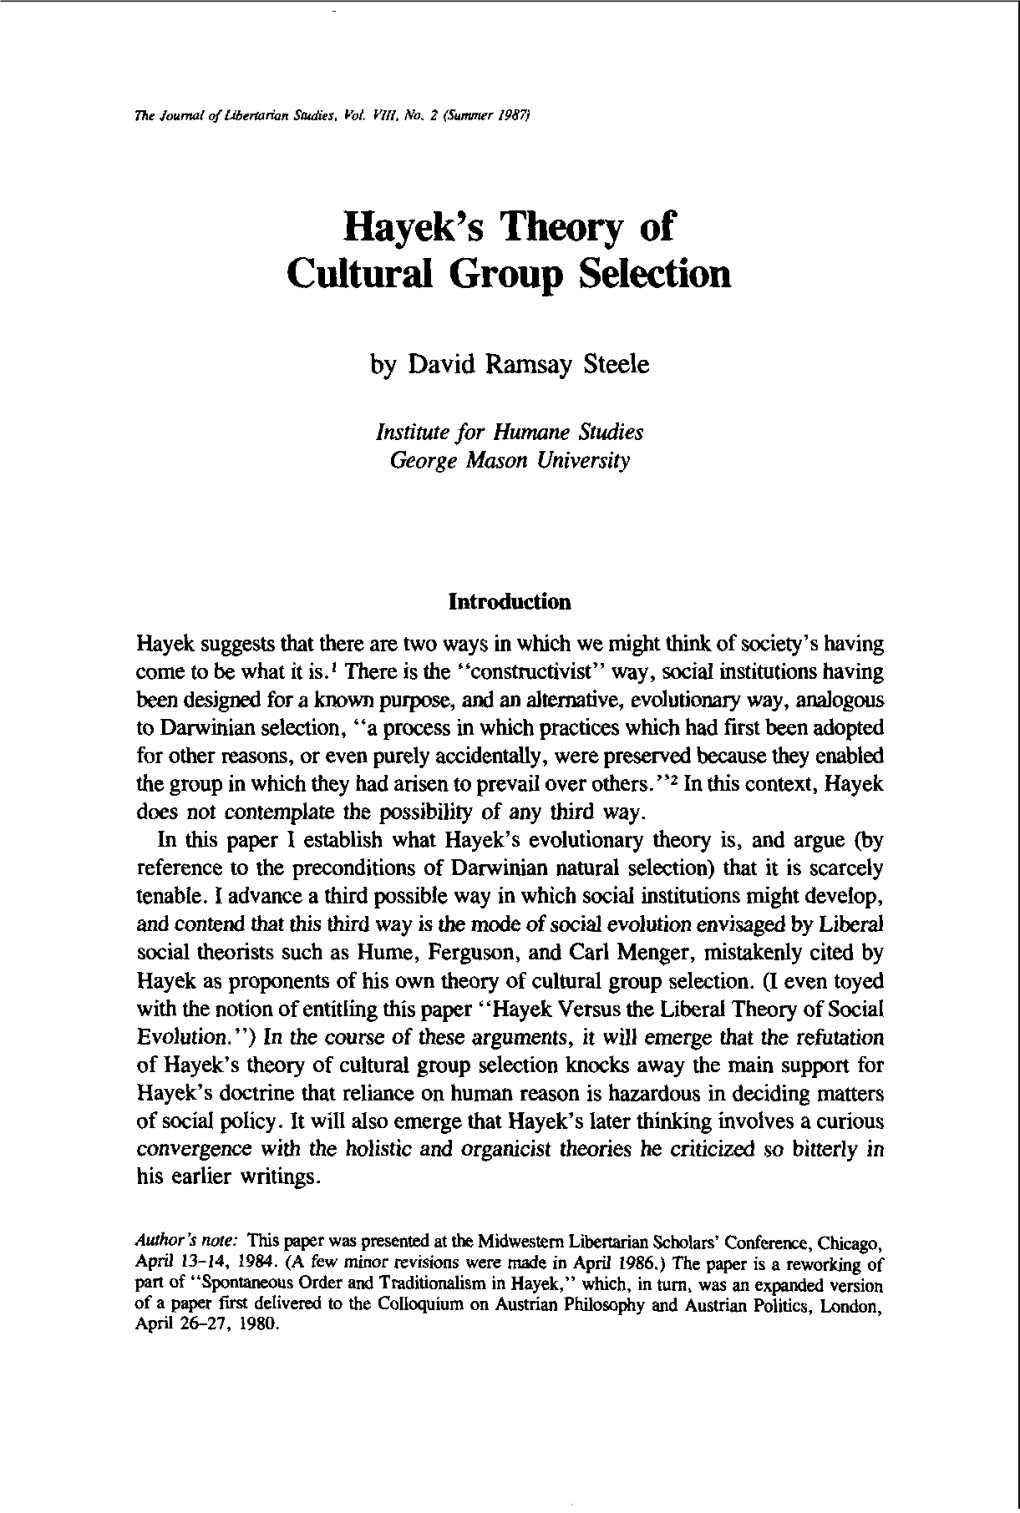 Hayek's Theory of Cultural Group Selection